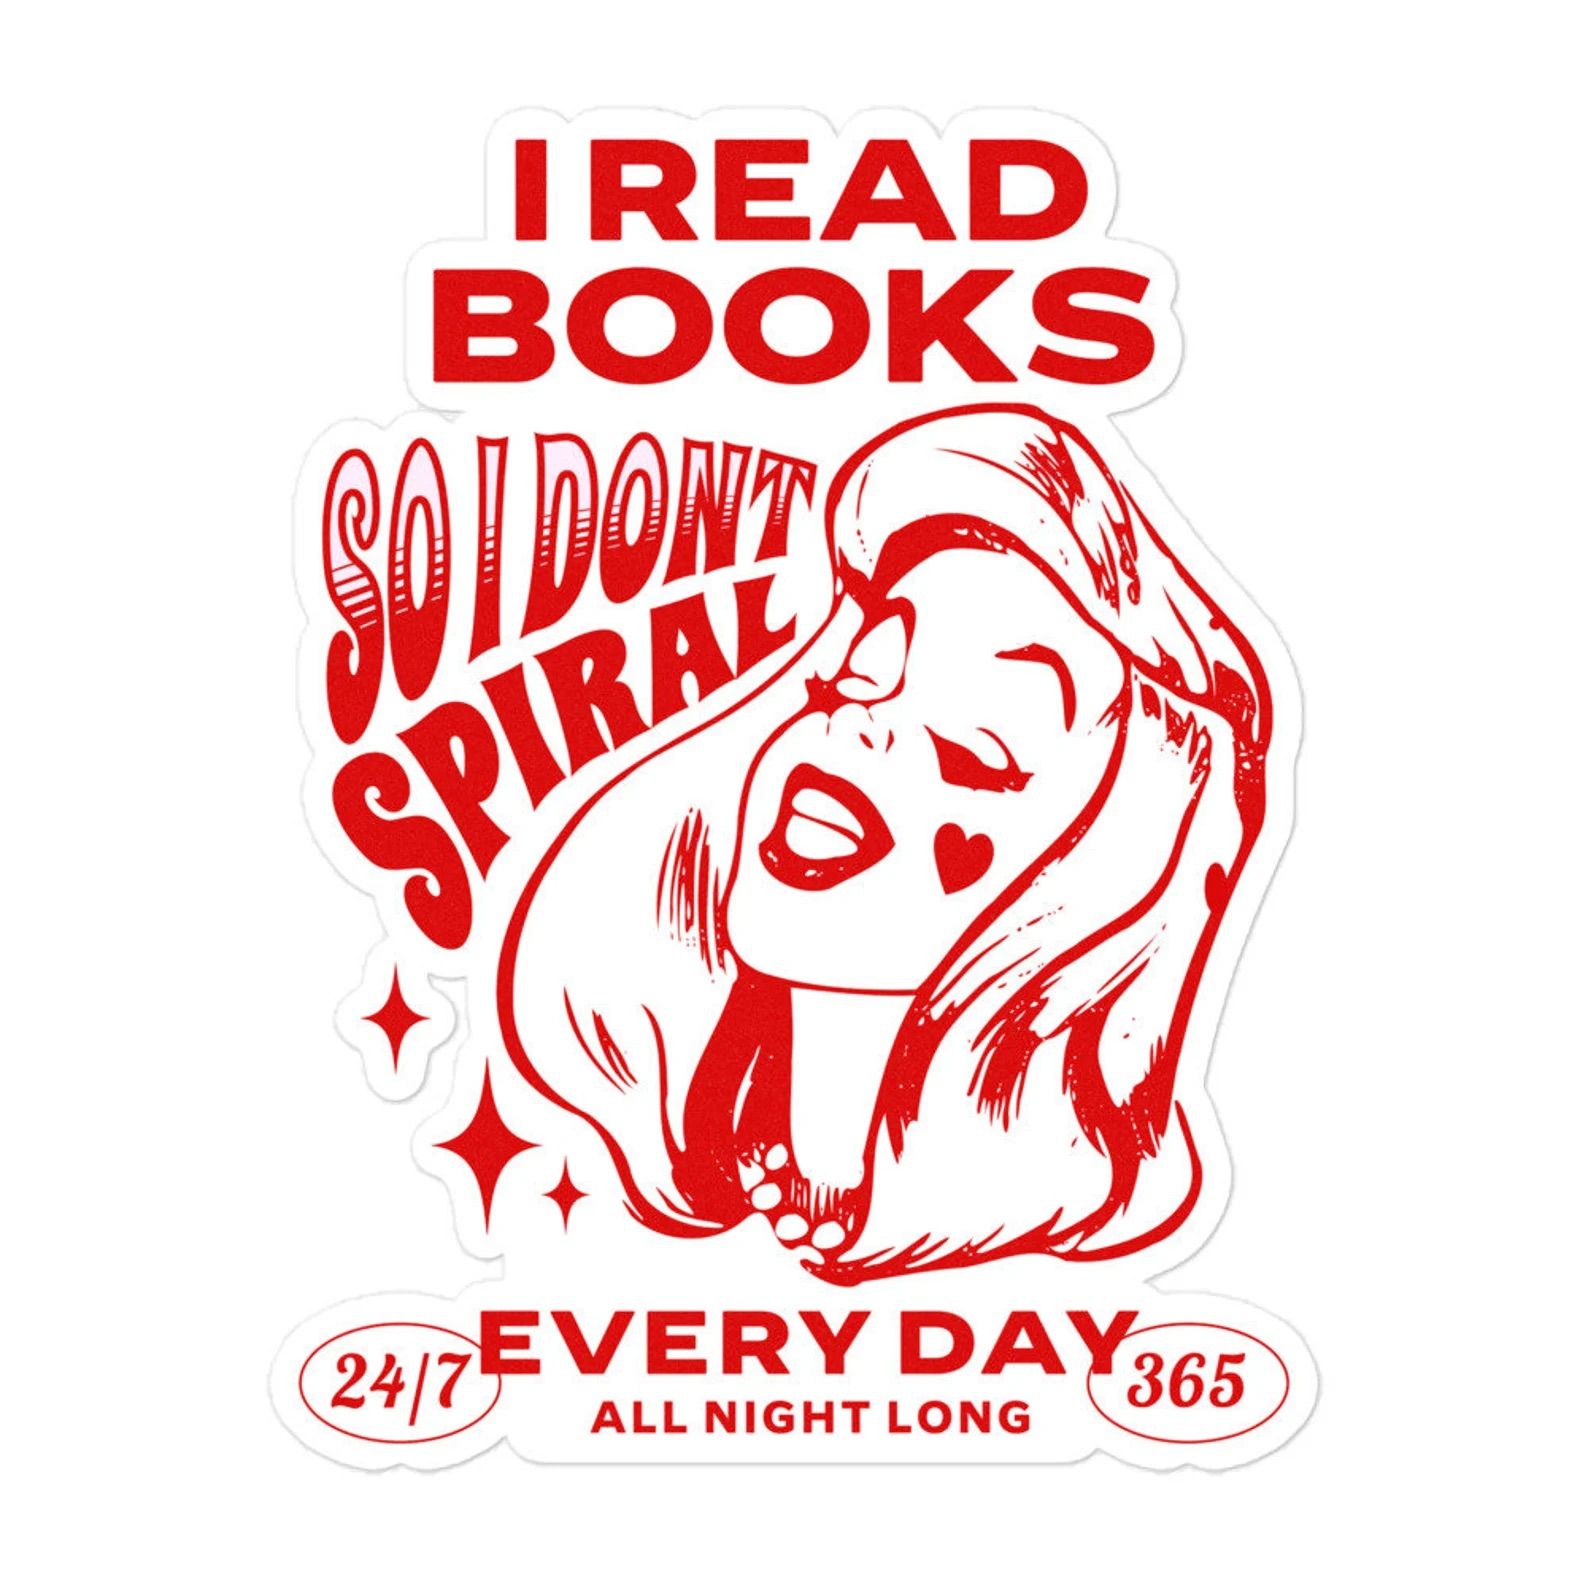 Red and white sticker that says I read Books So I don't spiral 24/7 every day all night long.